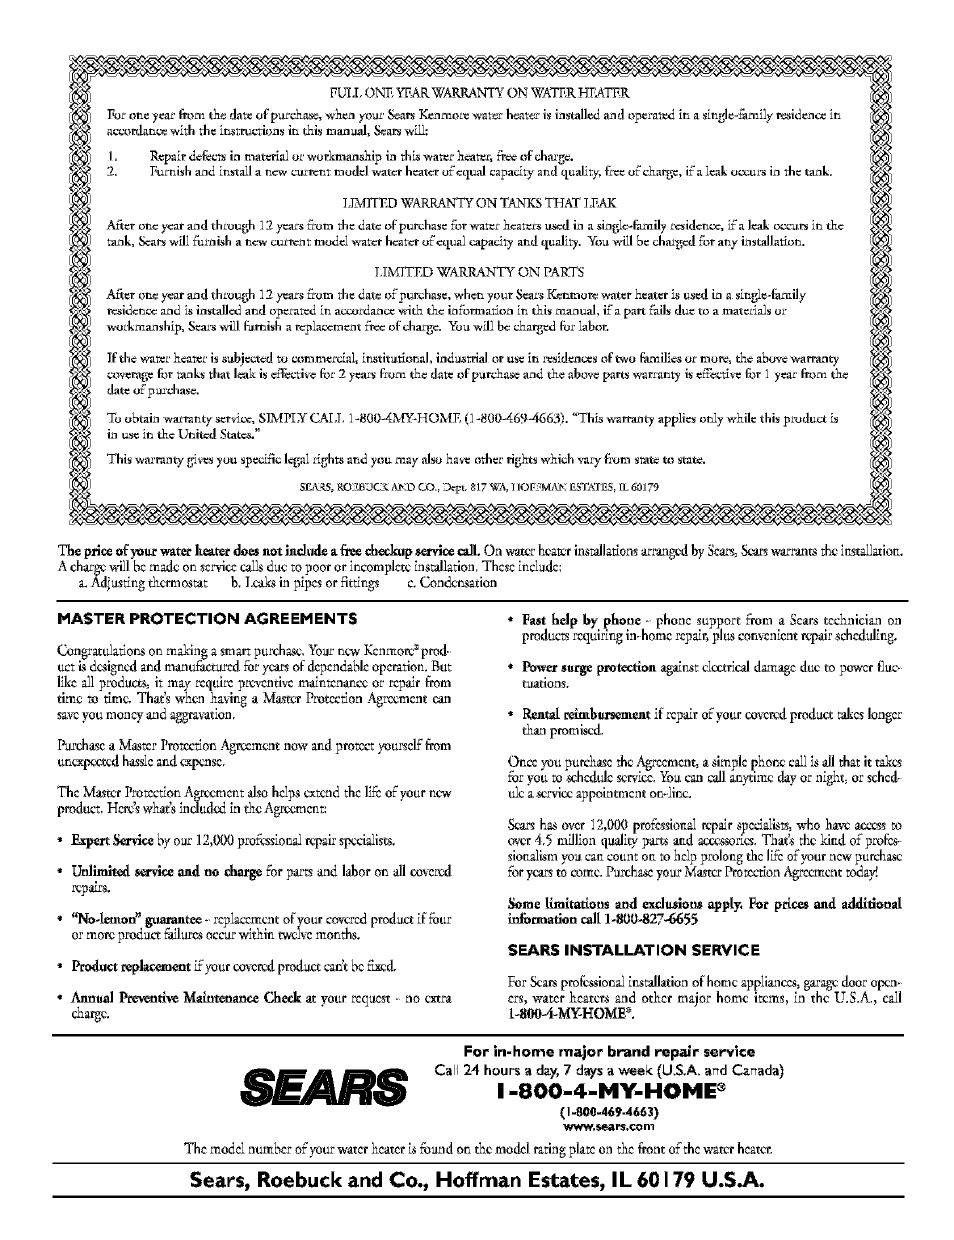 Sears Protection Agreement Number Master Protection Agreements Sears Installation Service For In